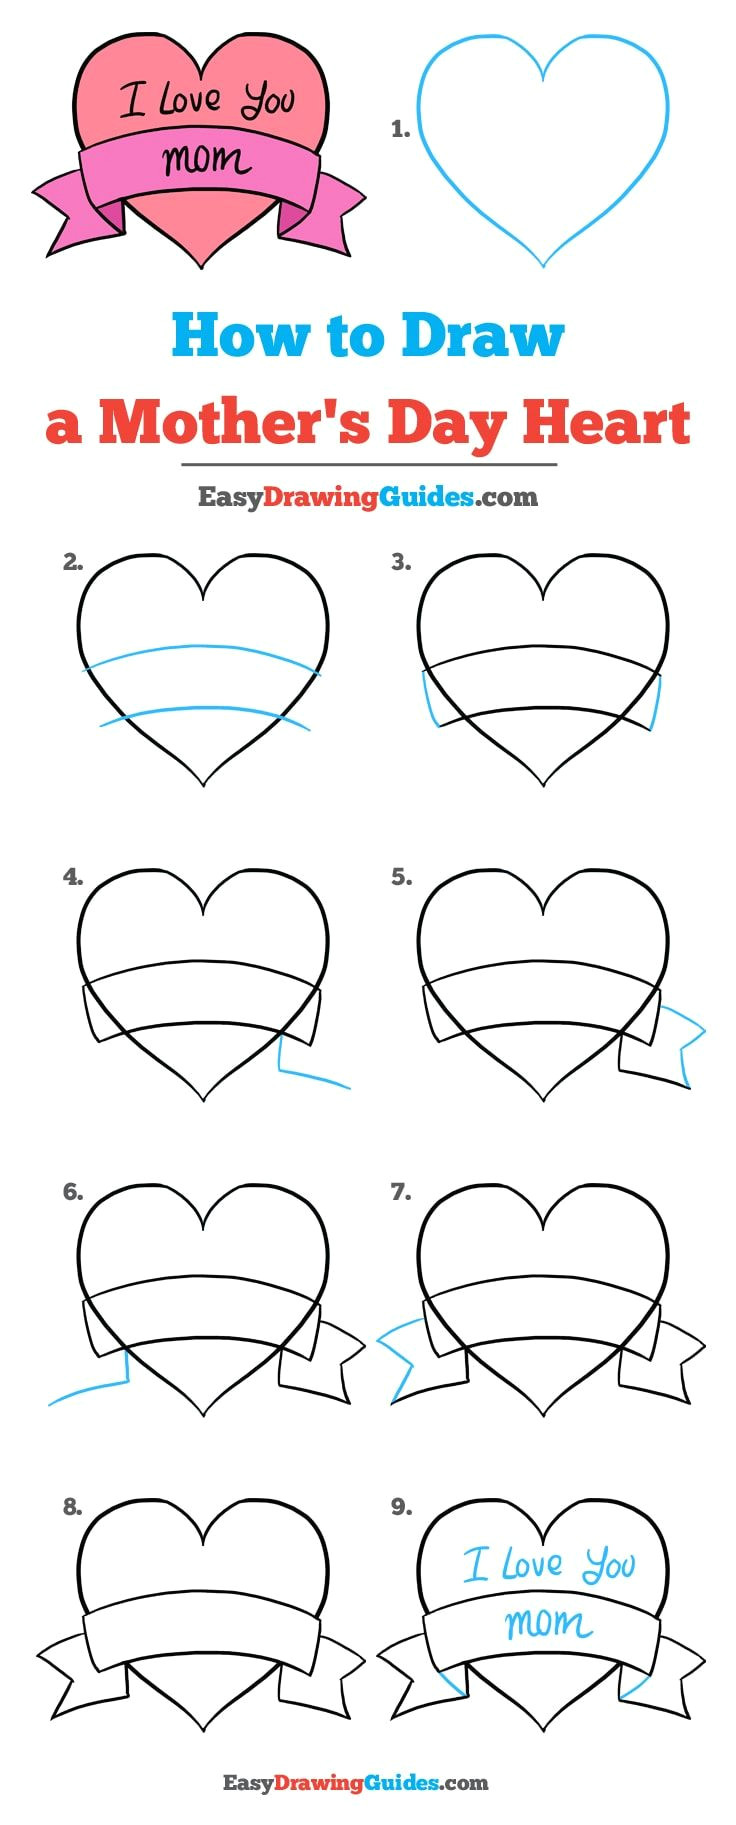 Easy Drawings Love Hearts How to Draw A Mother S Day Heart Really Easy Drawing Tutorial